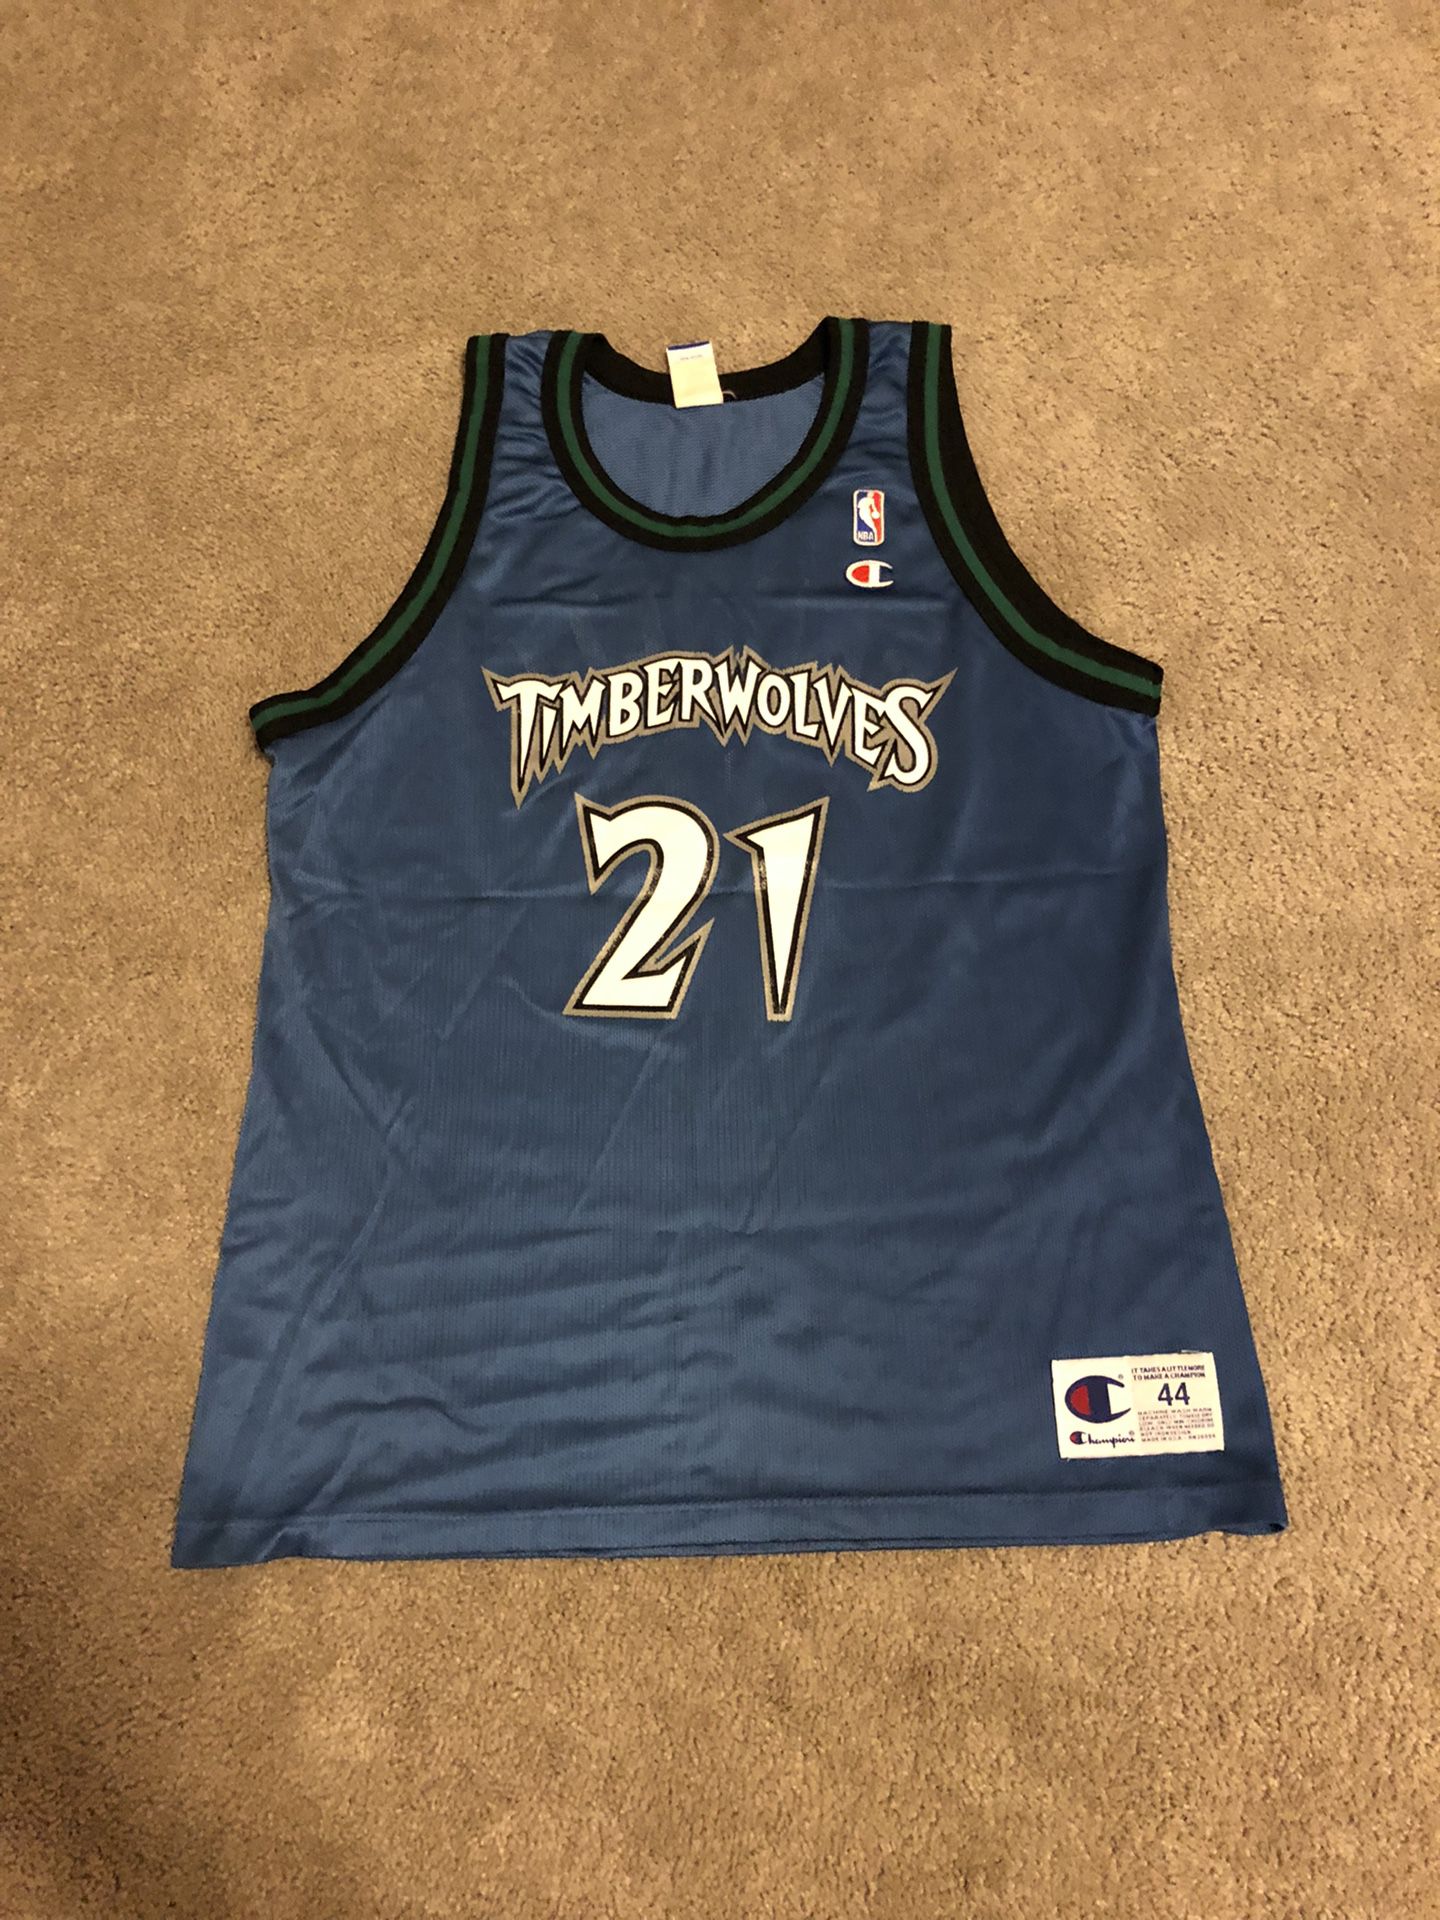 timberwolves jerseys for sale